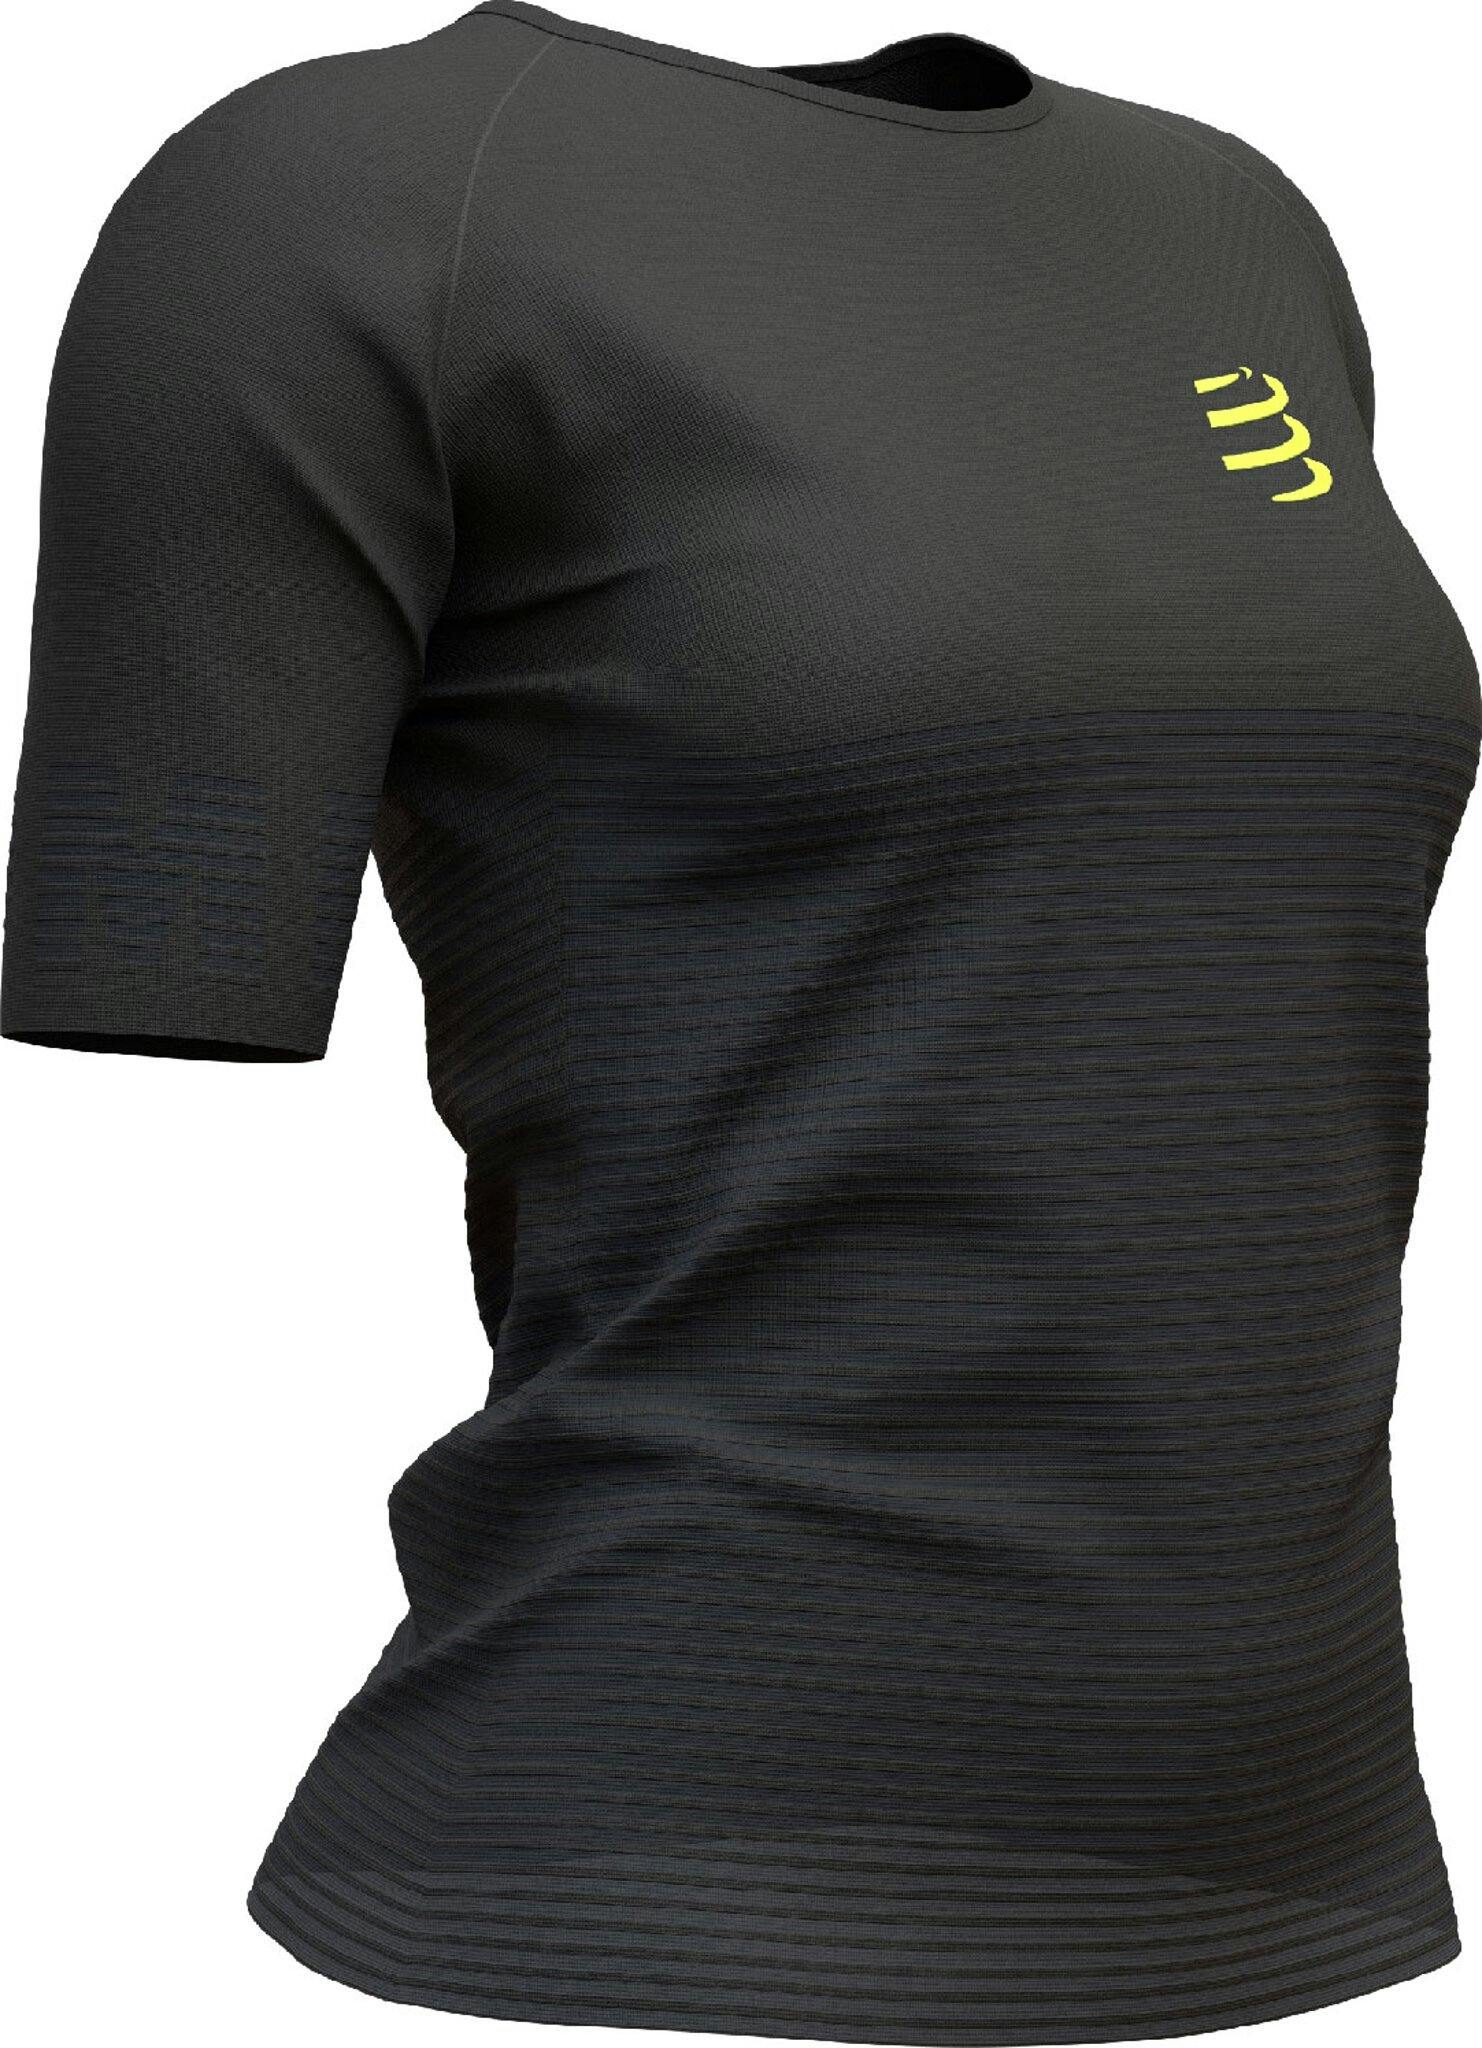 Product image for Training t-shirt 2019 Edition - Women's